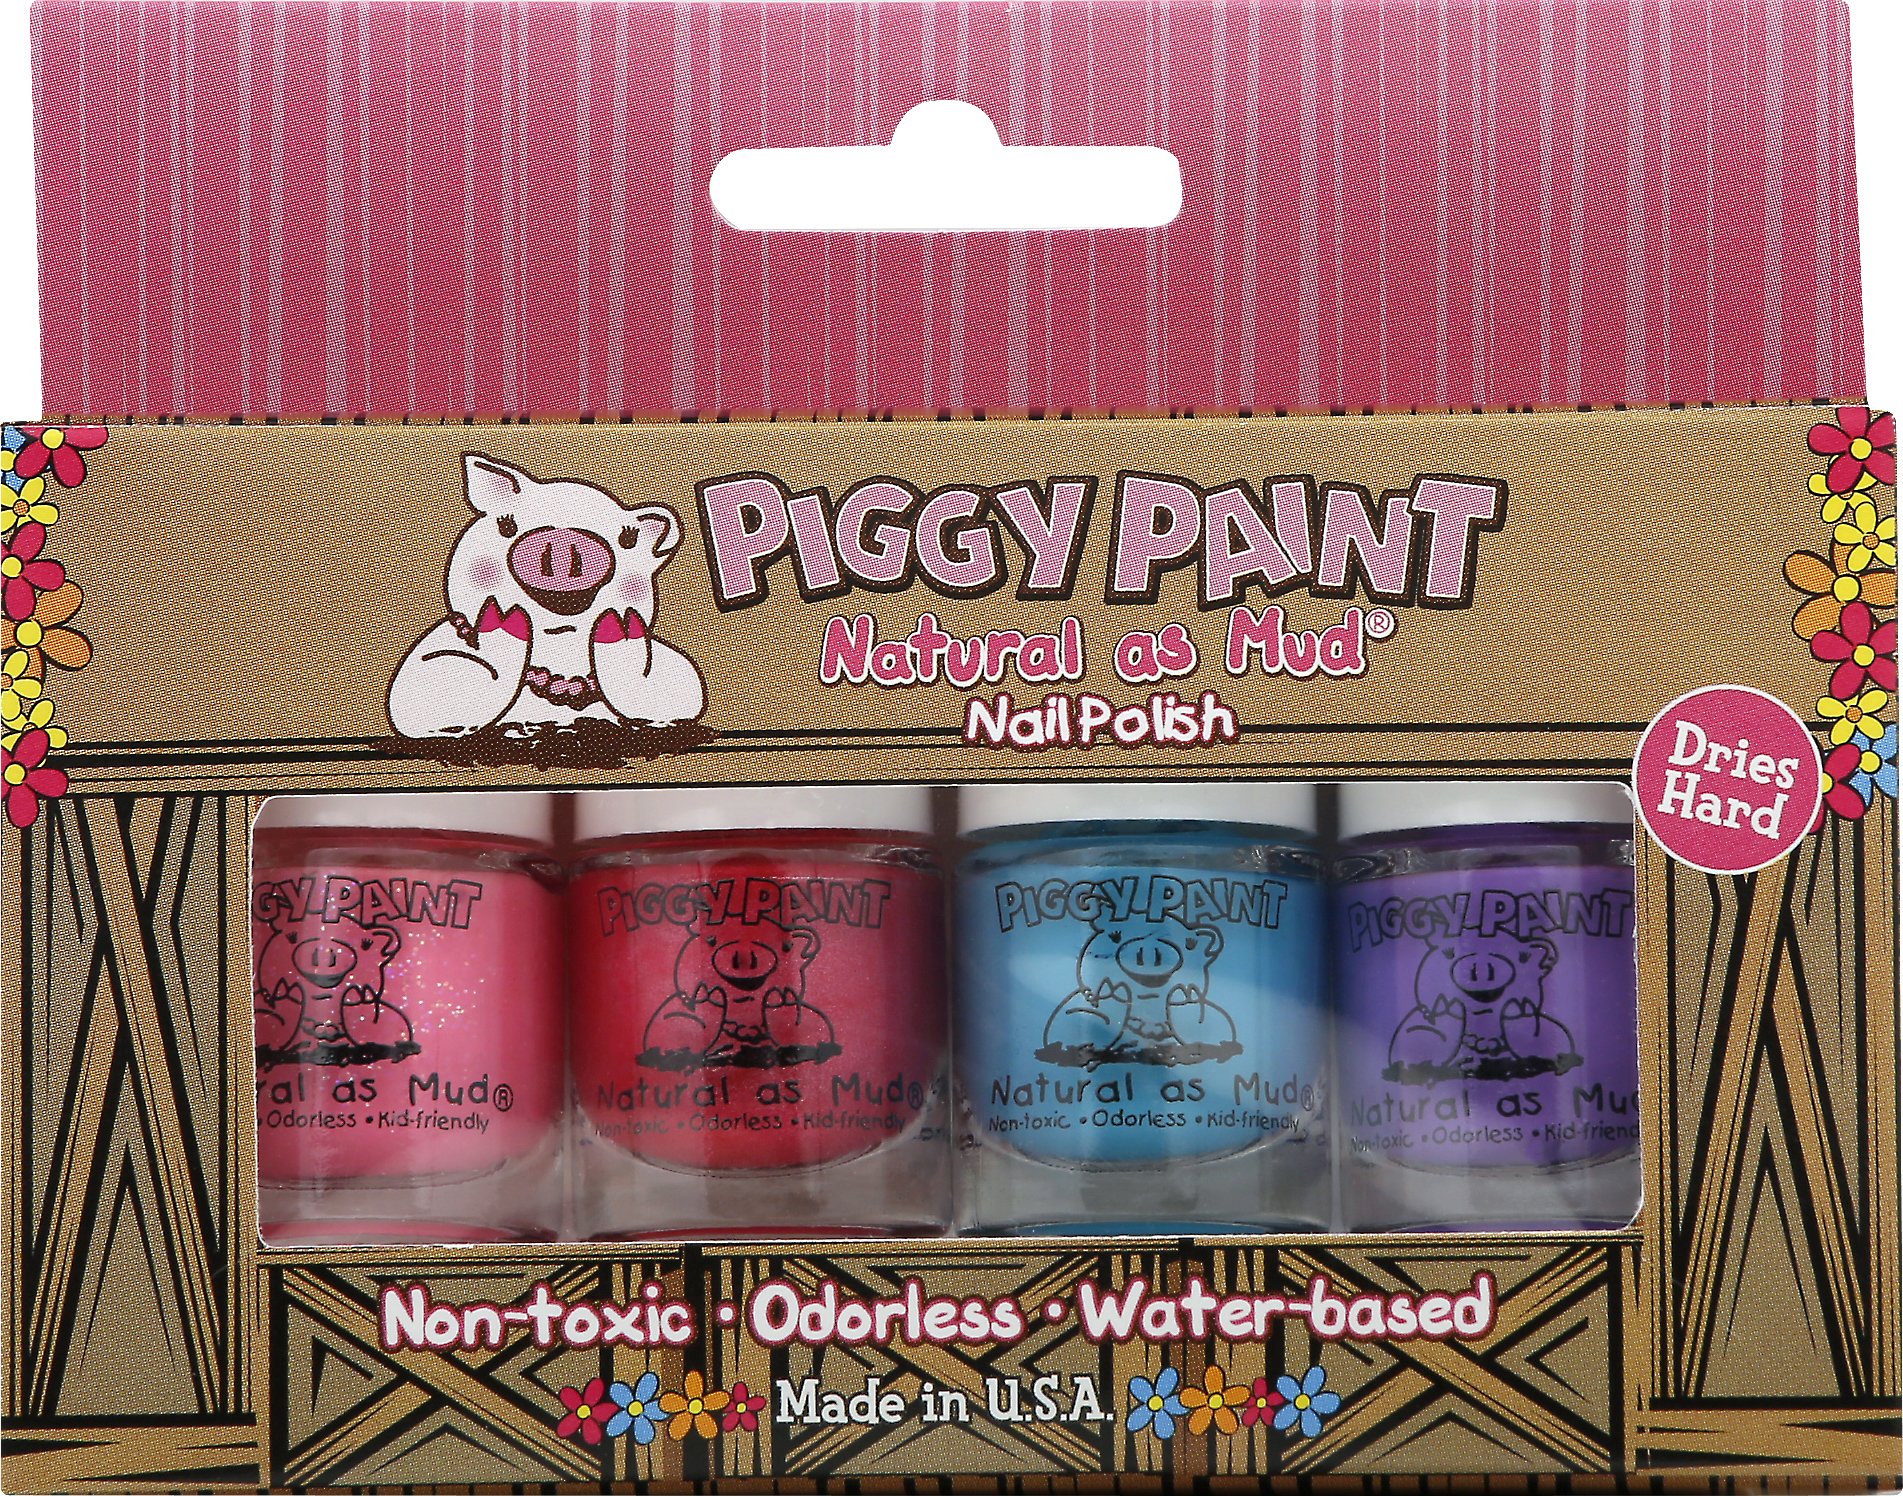 Piggy Paint Nail Polish- 4 Bottle Box- Non-toxicColors may vary from image based on Availbilty) - image 2 of 2